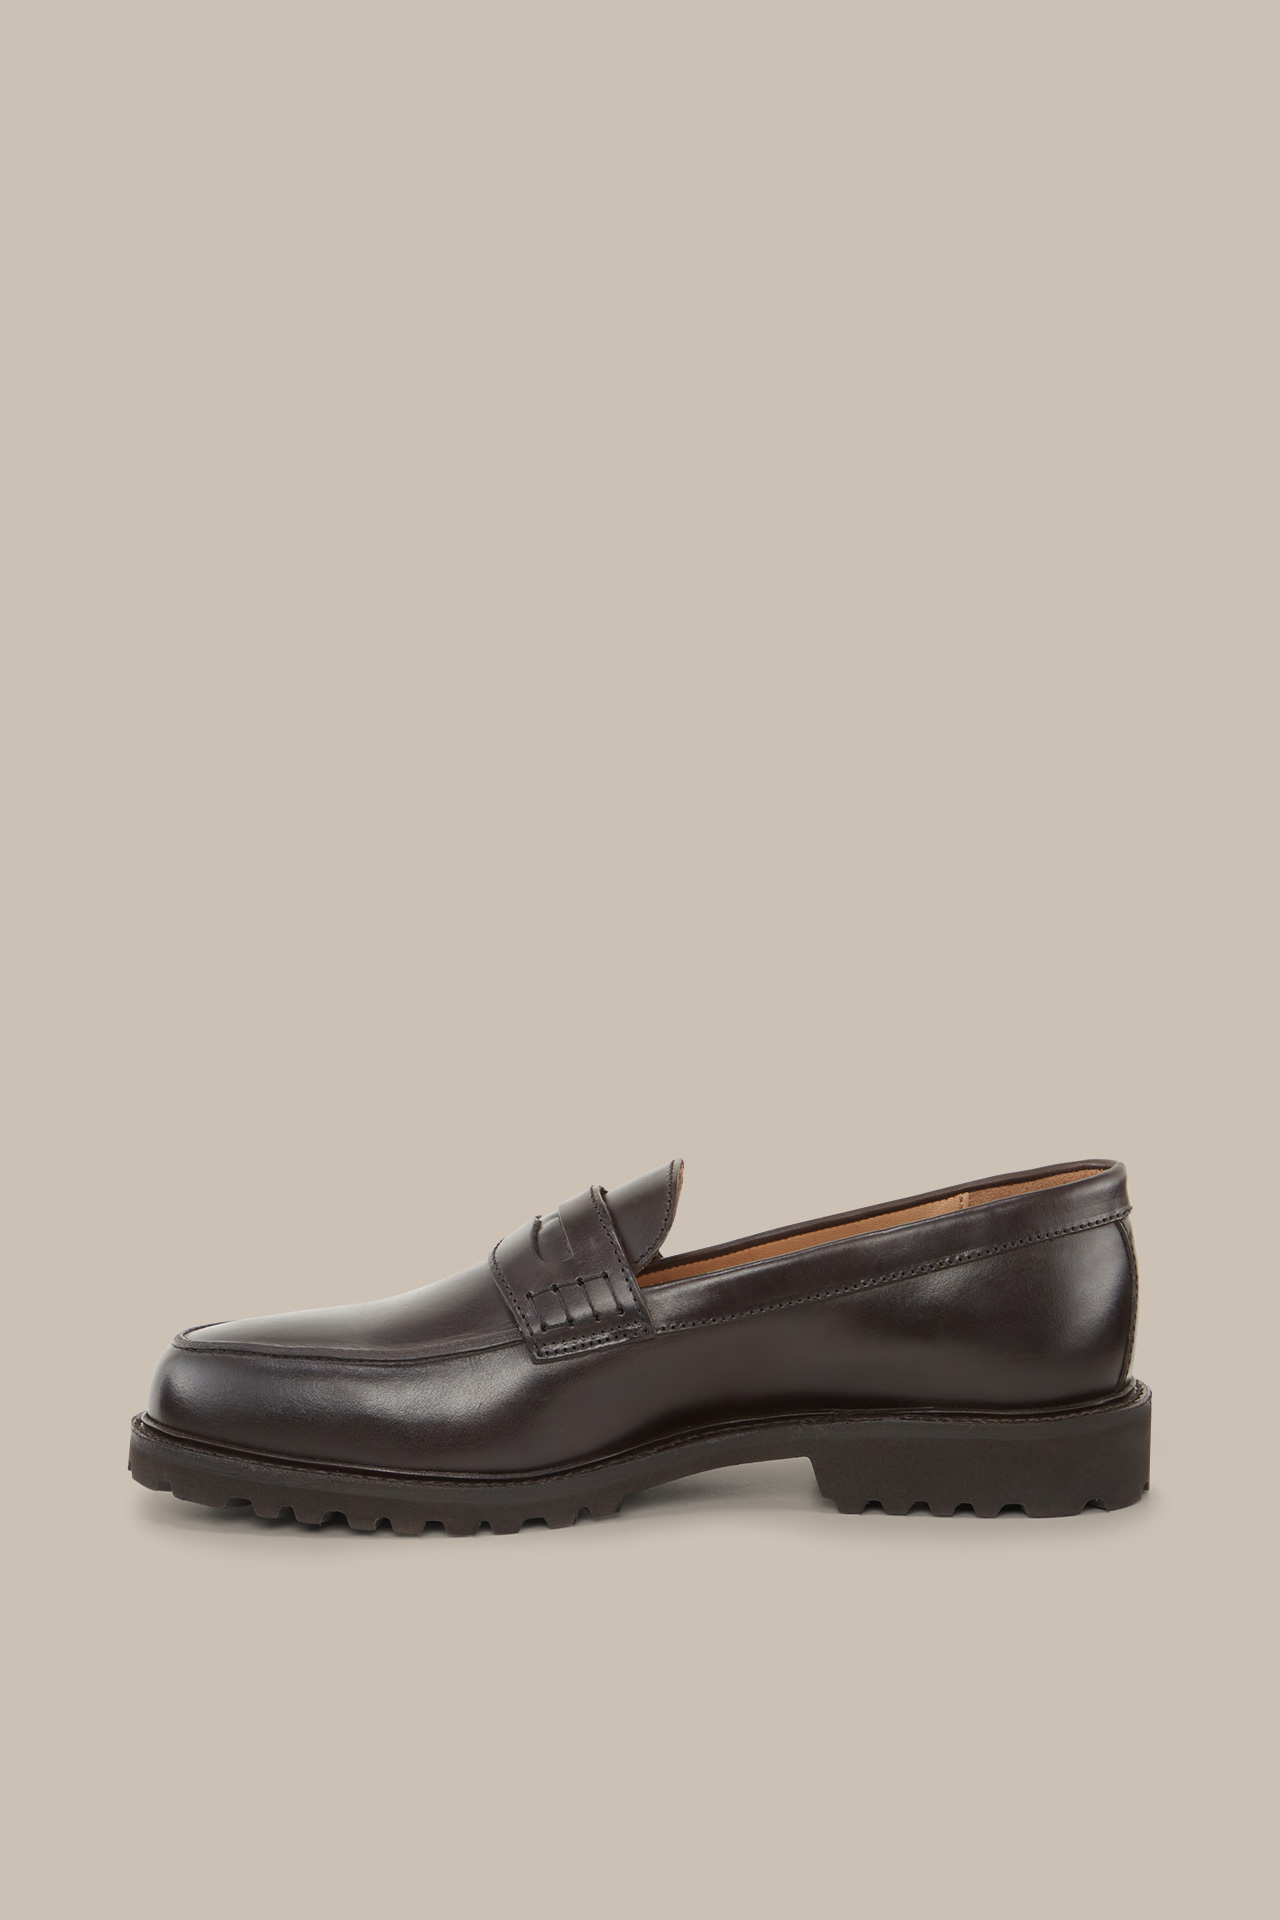 Loafer by Ludwig Reiter in Braun